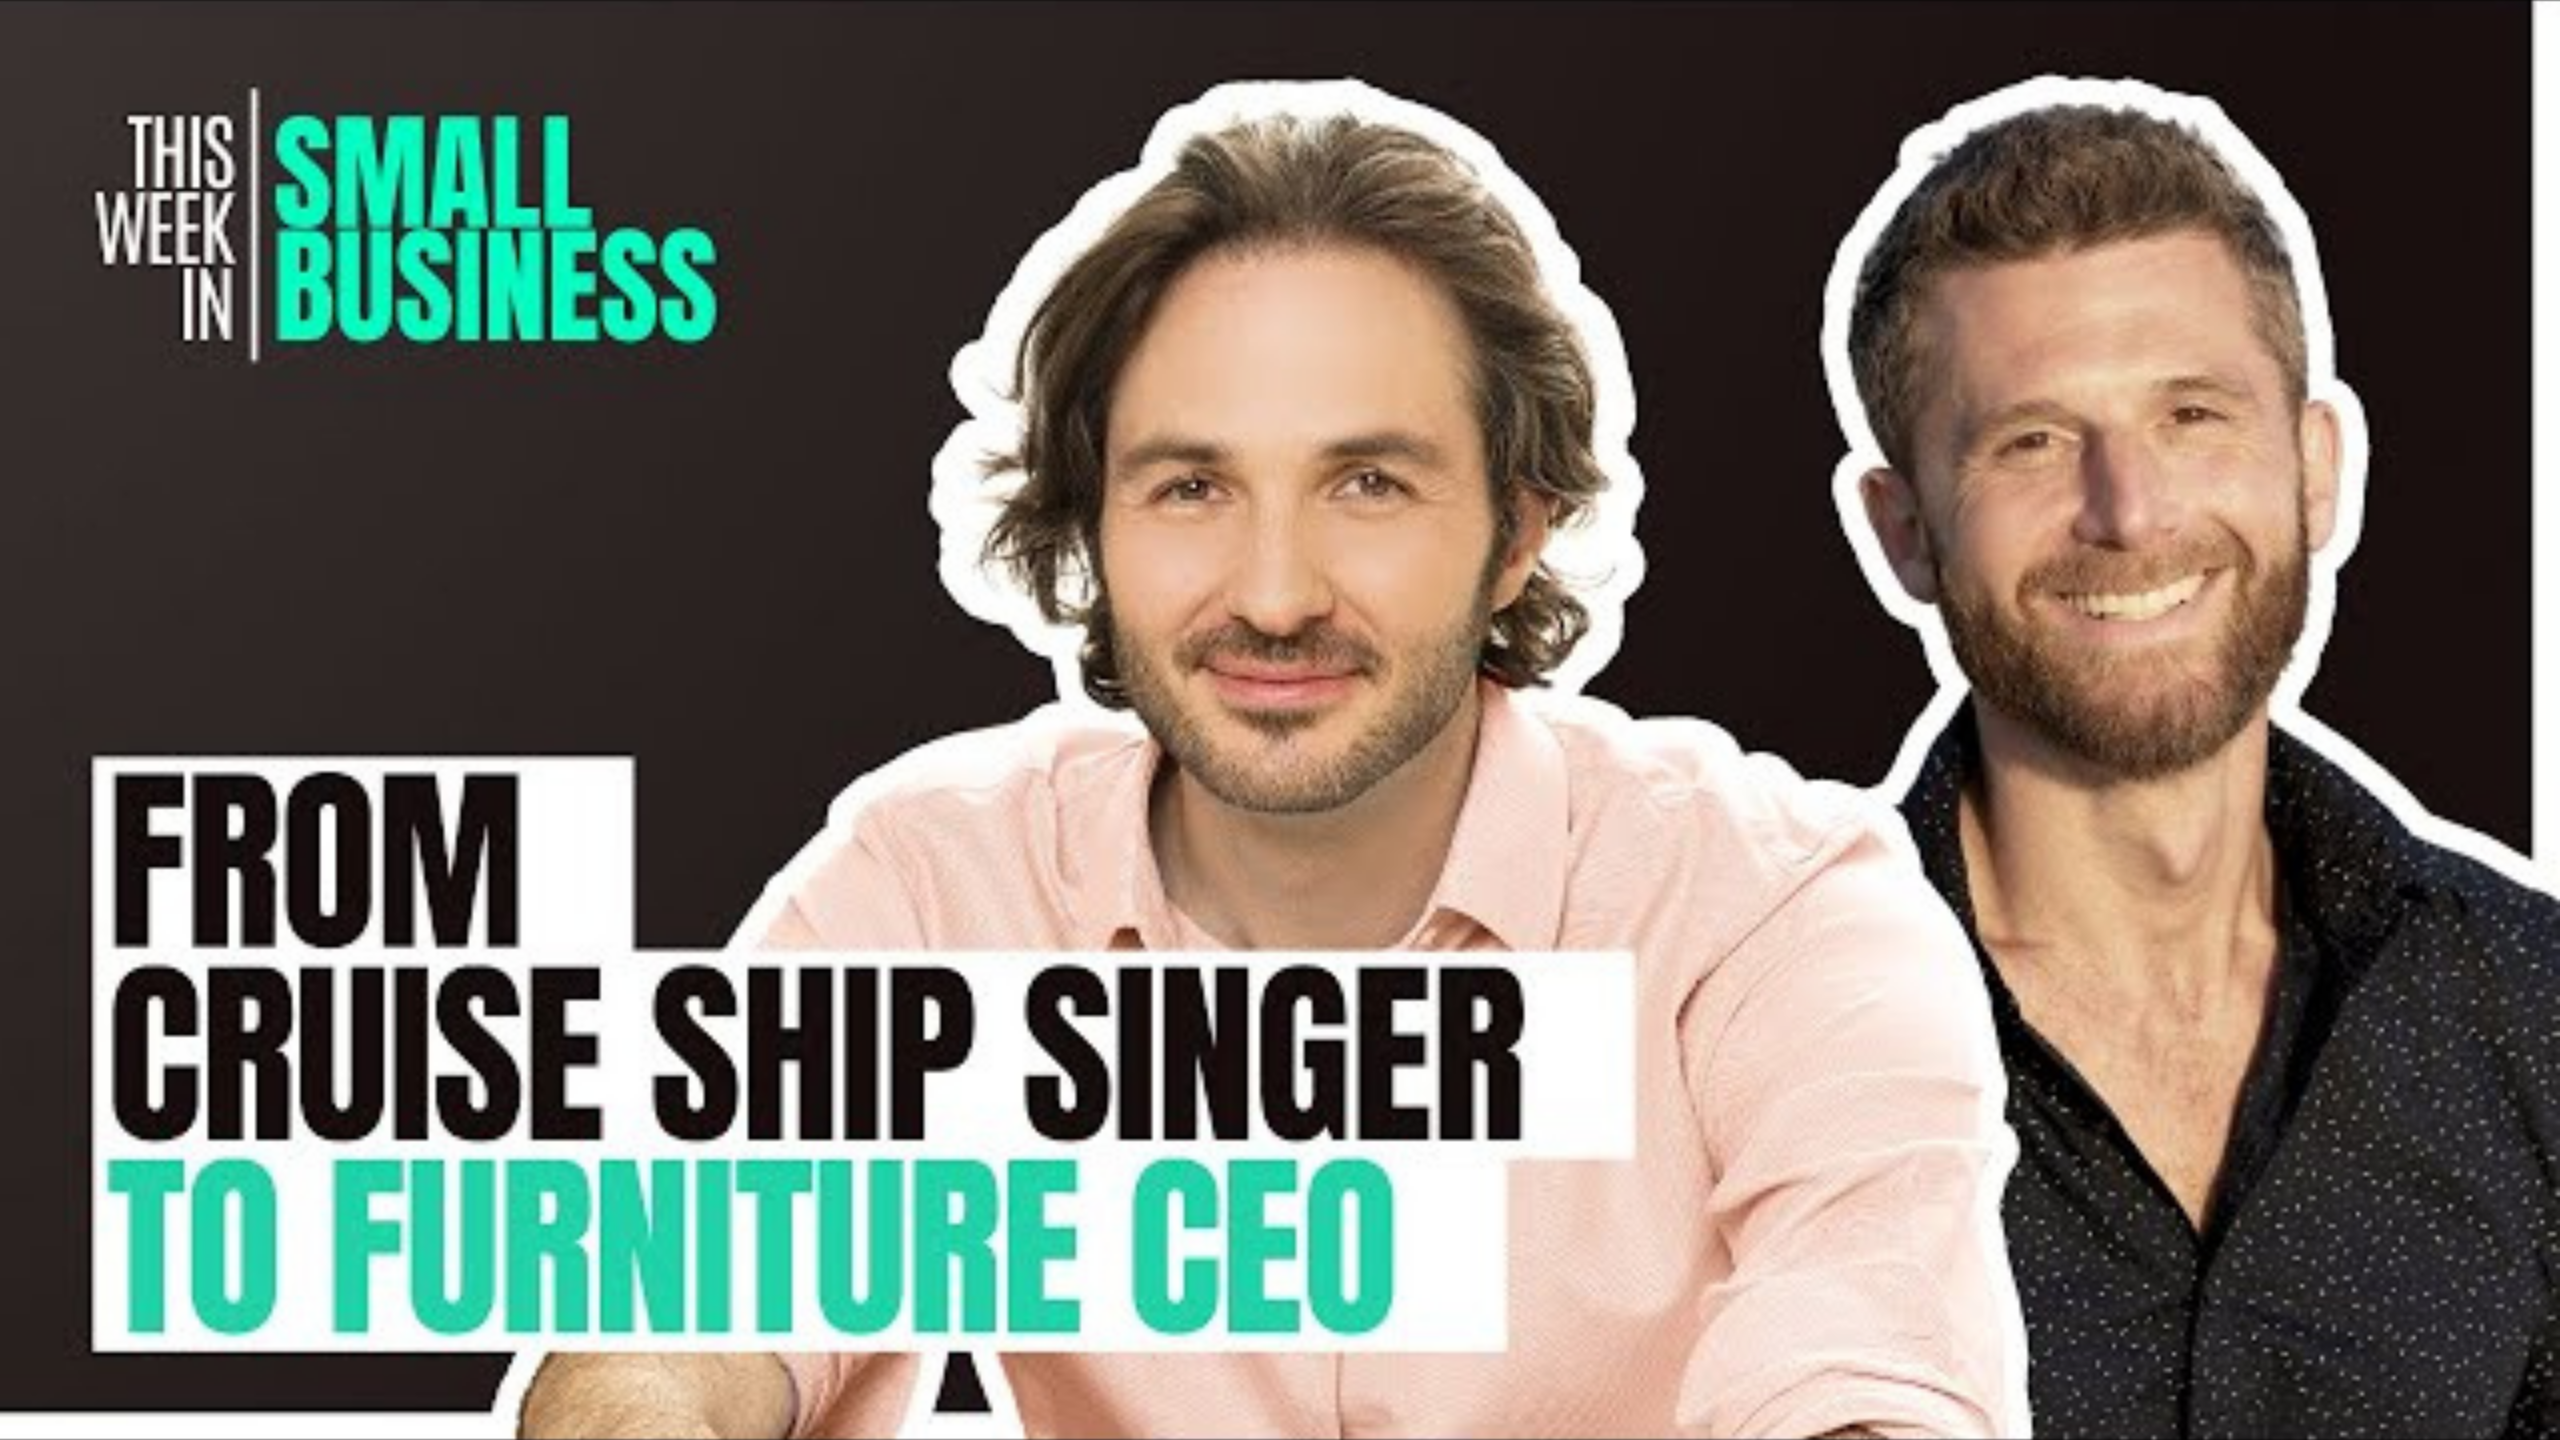 Two men are pictured against a black background. Text reads "This Week in Small Business" and "From Cruise Ship Singer to Furniture CEO." The man on the left has shoulder-length hair and is wearing a pink shirt. The man on the right has short hair and a beard, and is wearing a dark shirt.